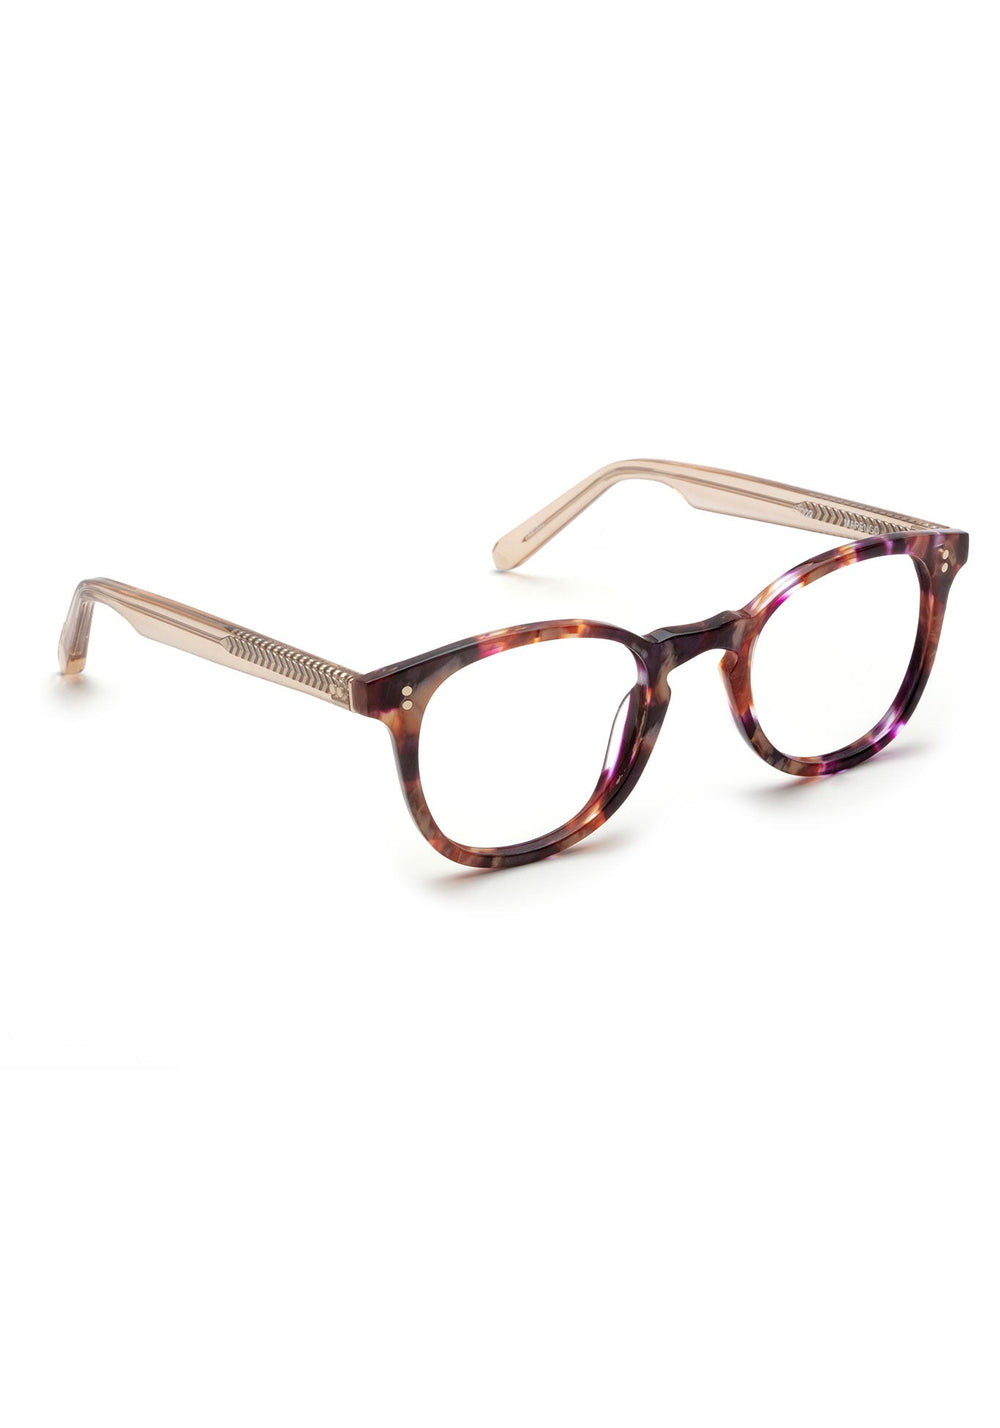 KREWE - MARENGO | Stardust + Buff Handcrafted, luxury pink and red acetate eyeglasses